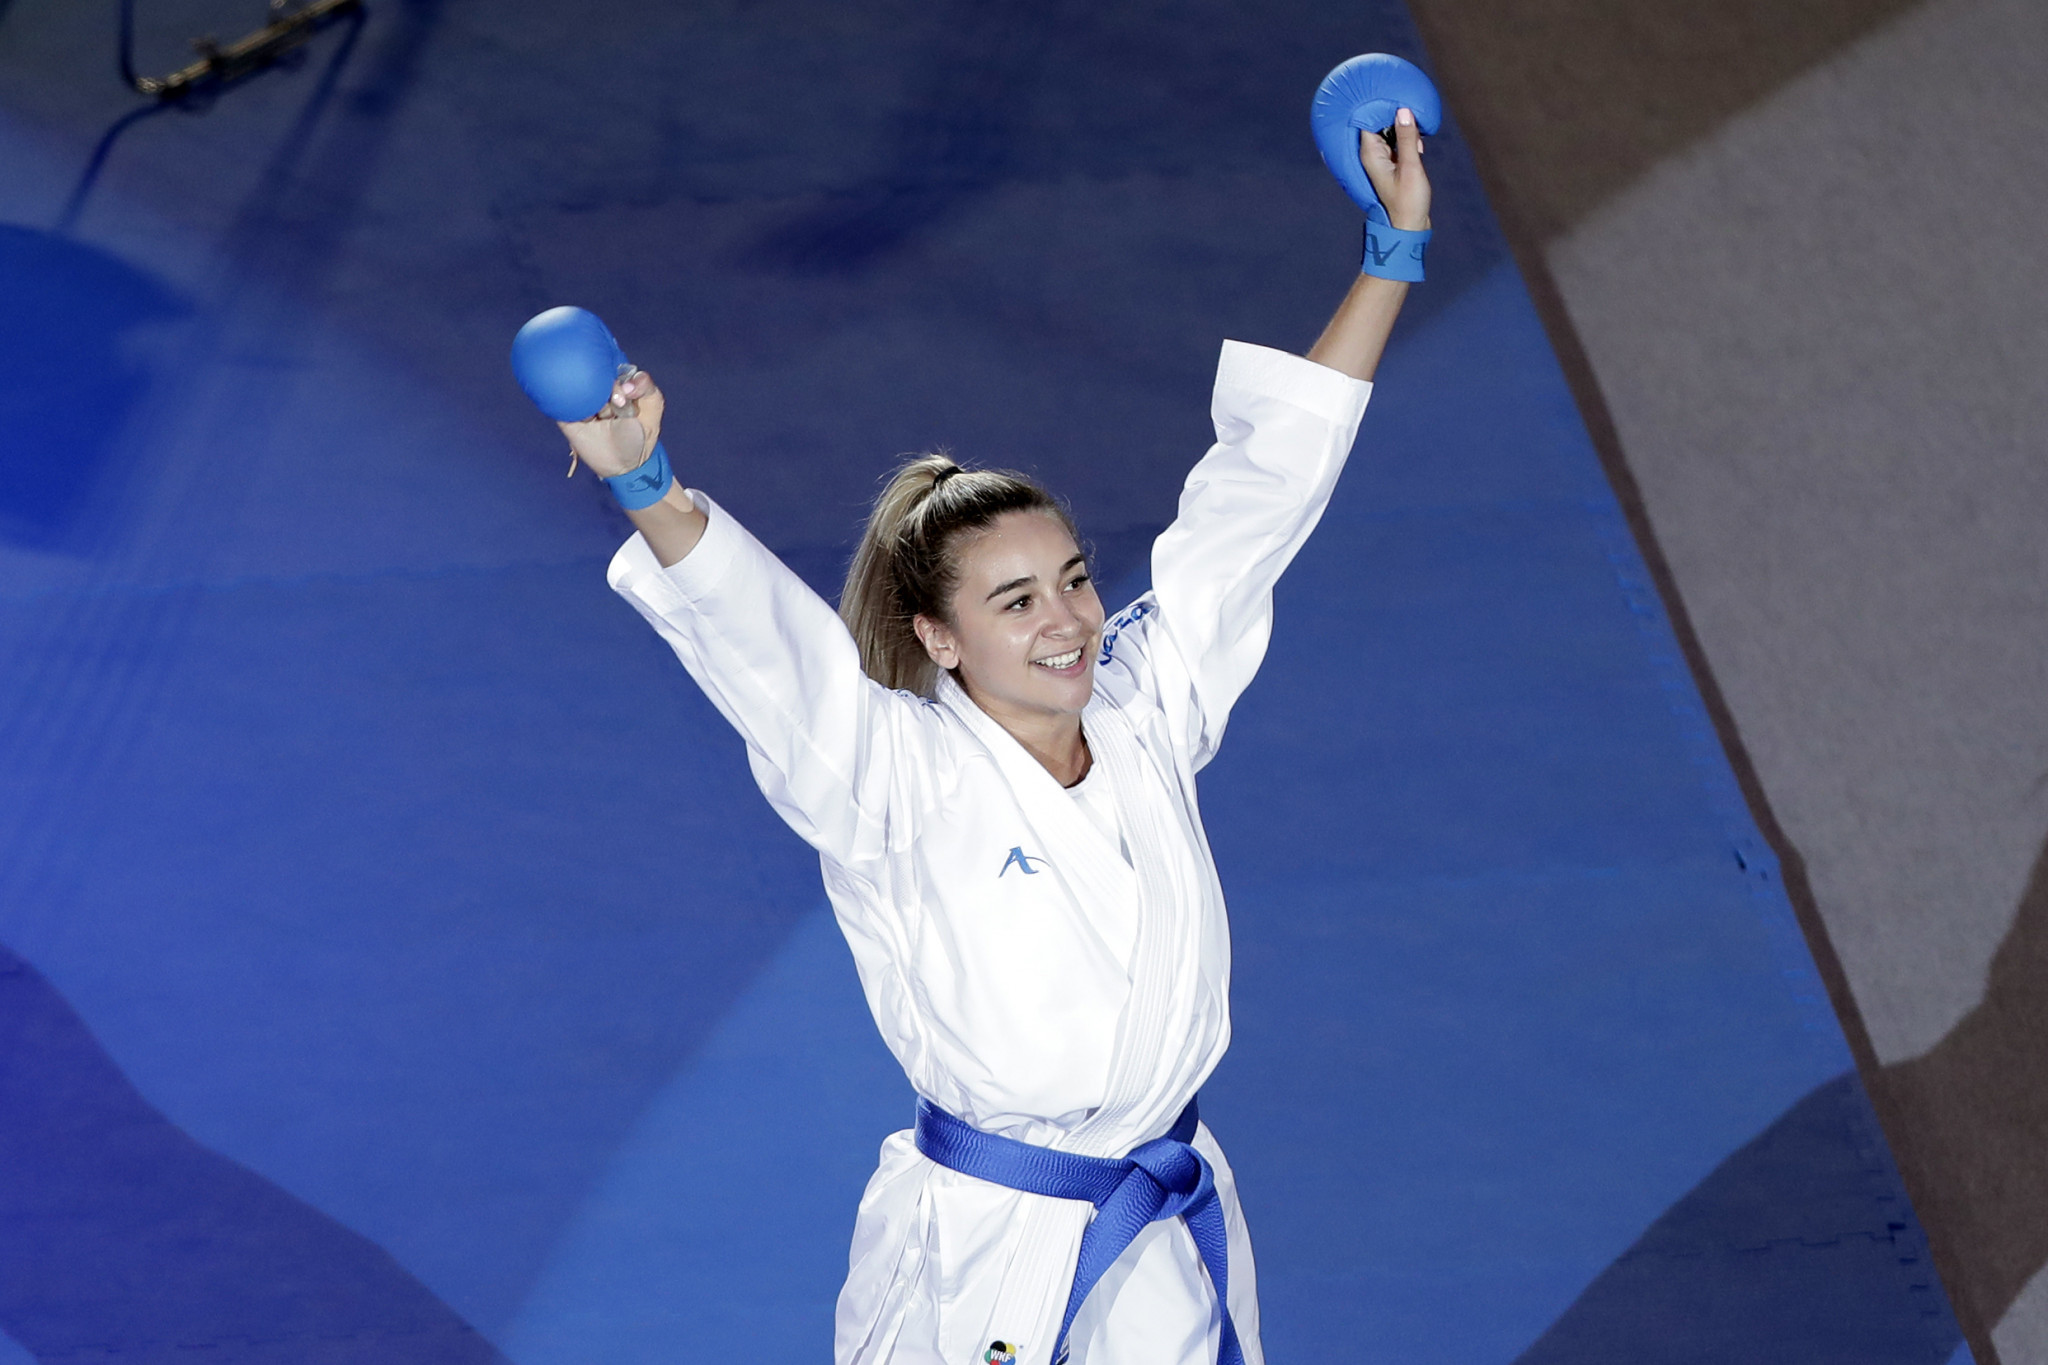 Salazar and Terliuga on track to win fifth medals in as many events at Karate-1 Premier League in Baku